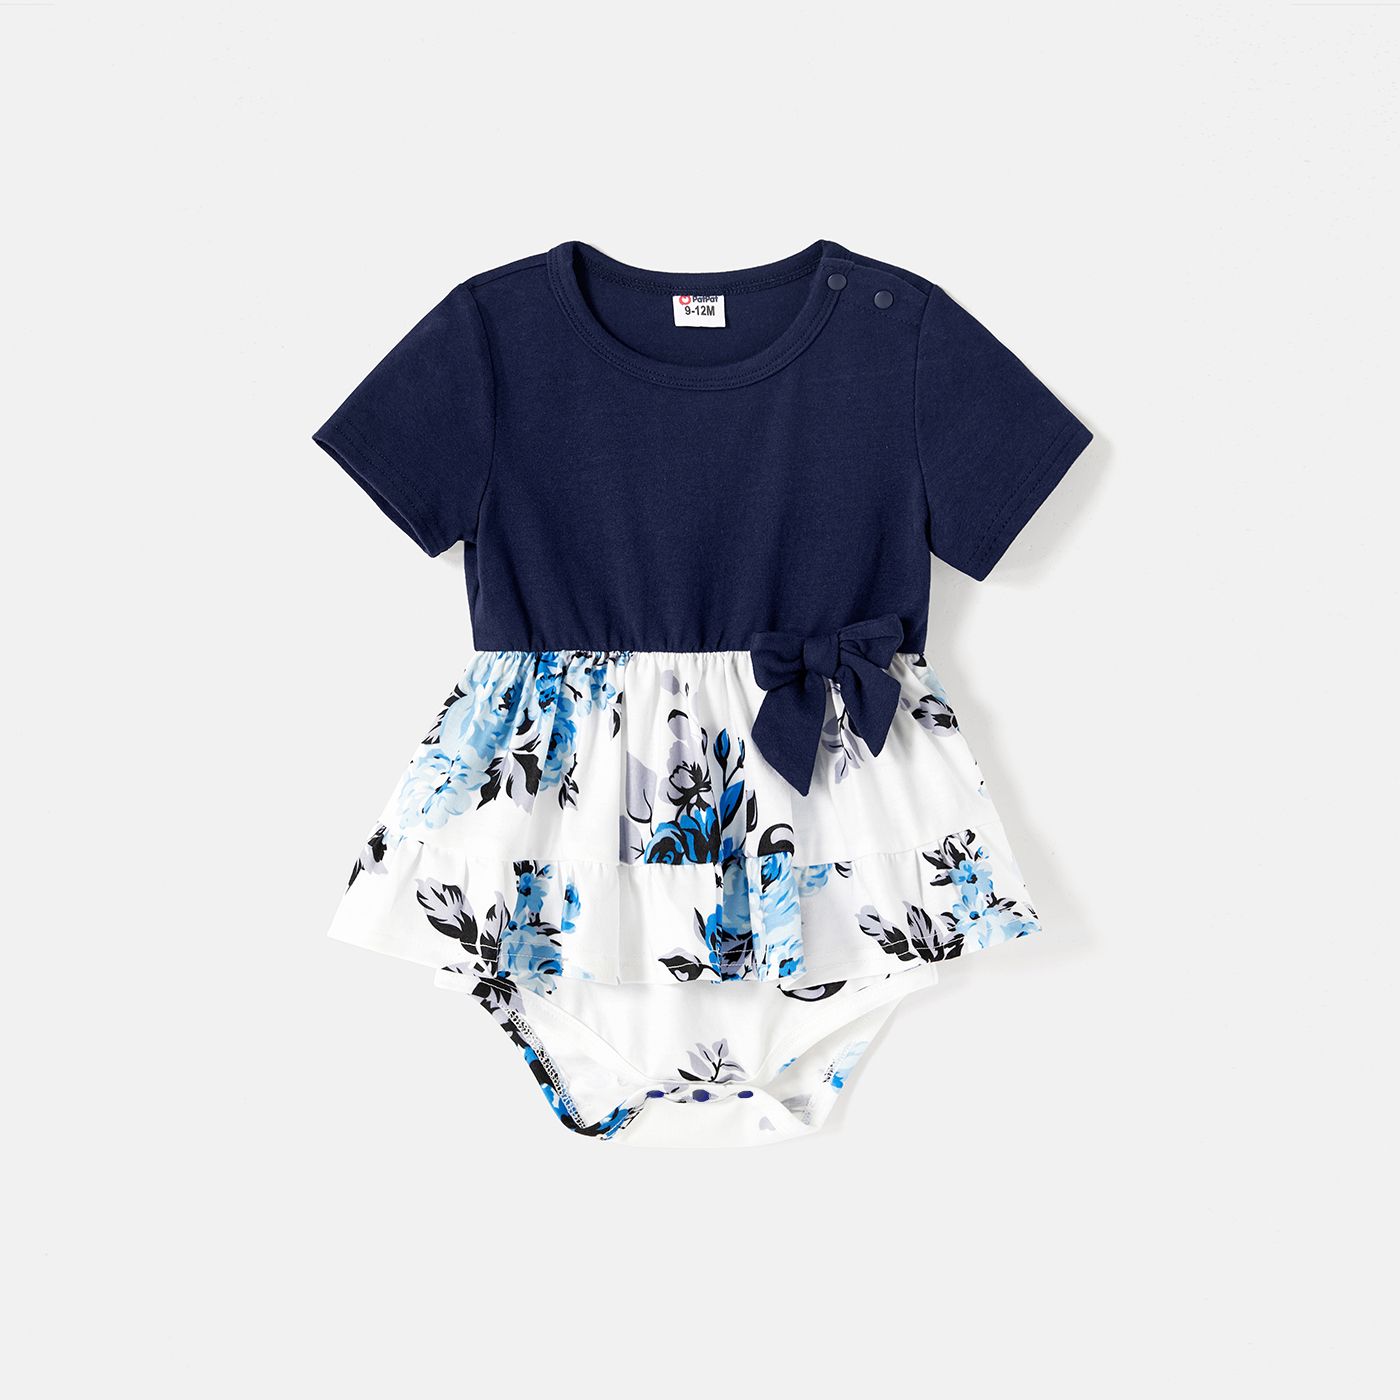 Family Matching 95% Cotton Dark Blue Short-sleeve T-shirts and Floral Print Spliced Dresses Sets